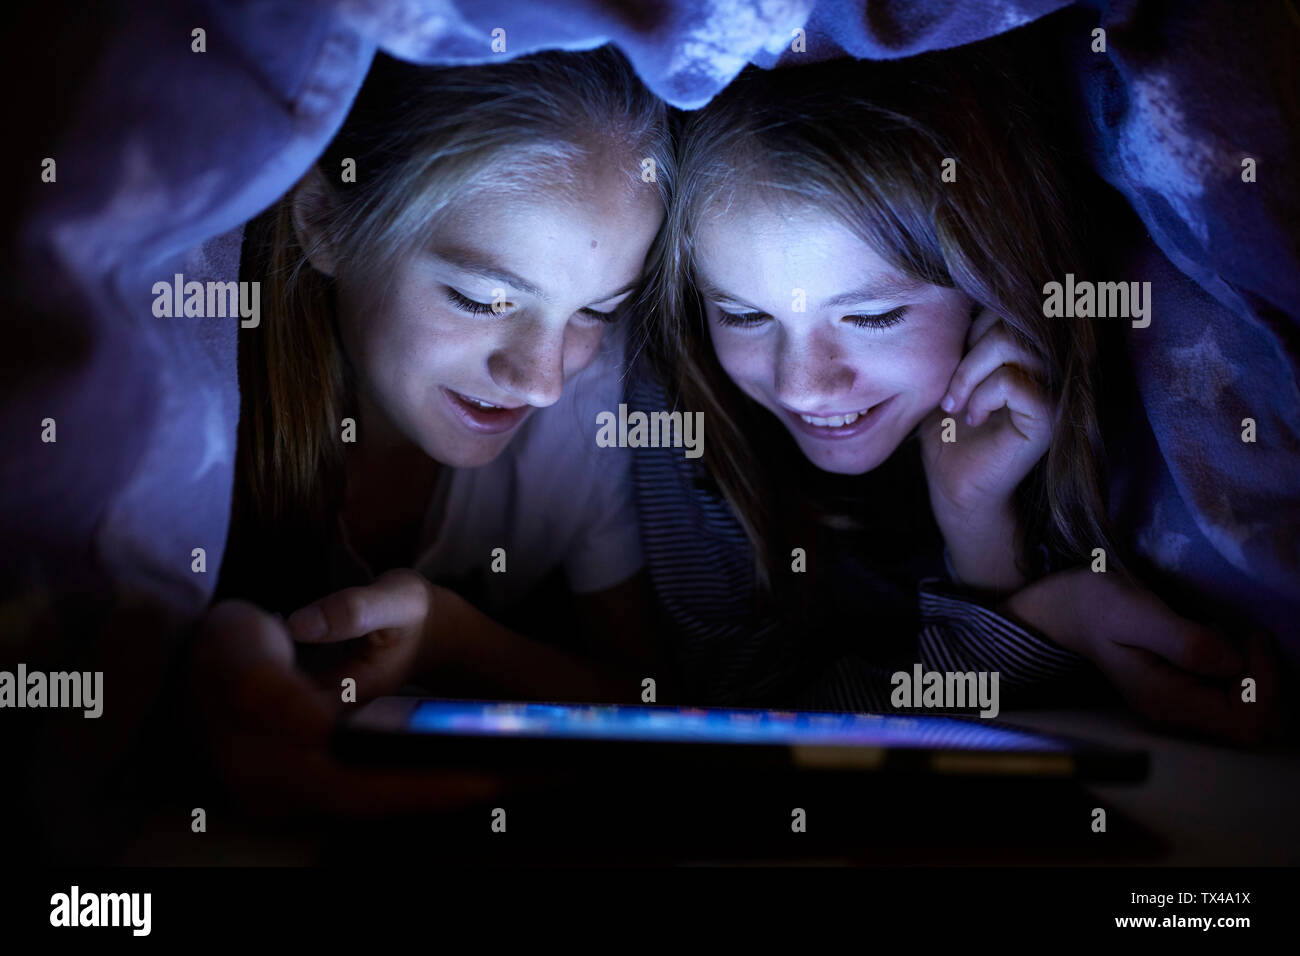 Two sisters playing secretly with their digital tablet, hidden under blanket Stock Photo